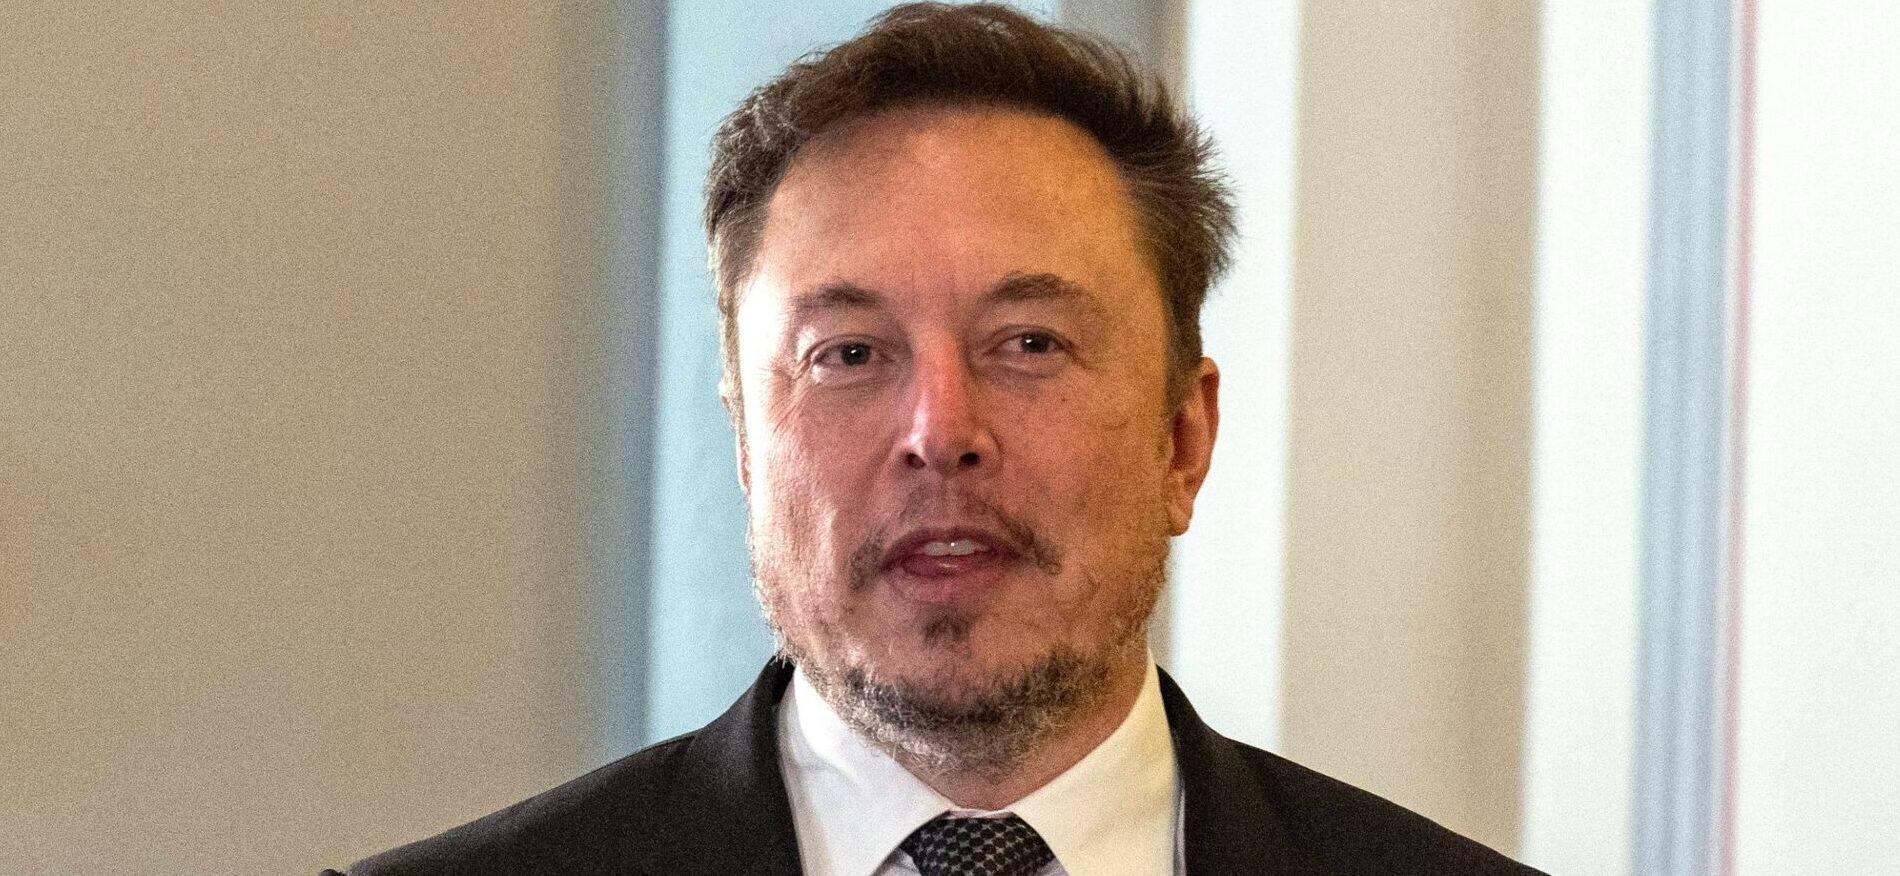 Elon Musk’s Plan To Fund National Signature Campaign In Support Of First Amendment Met With Praise